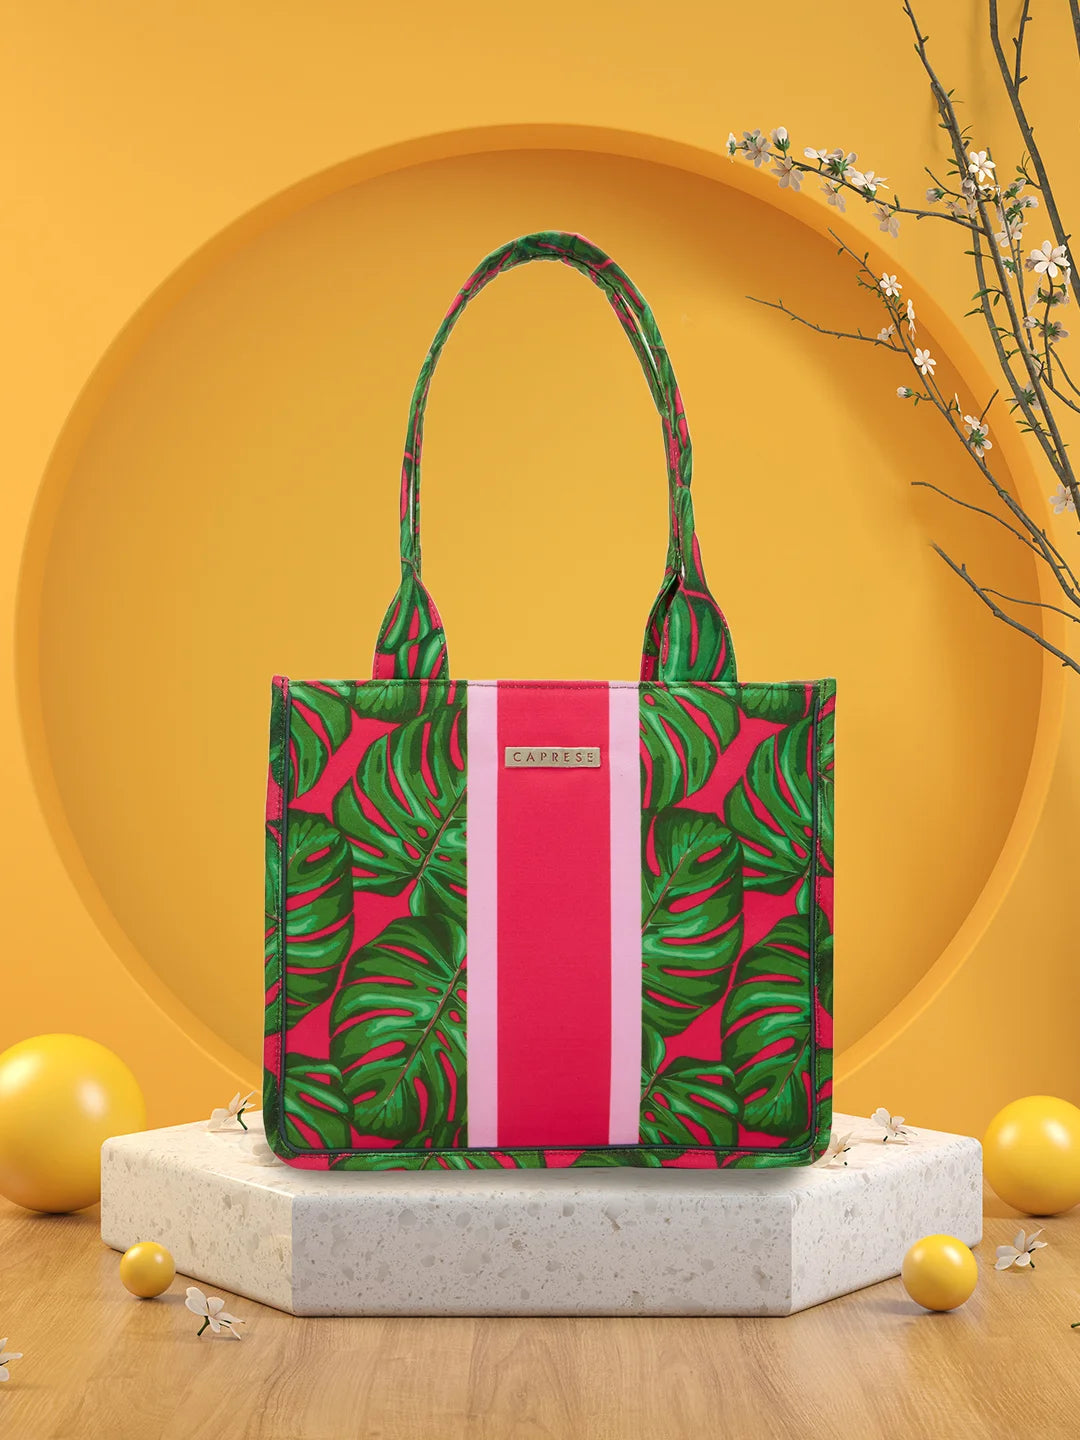 Cute Summer Tote Bags & Purses Up to 71% Off + Free Shipping!